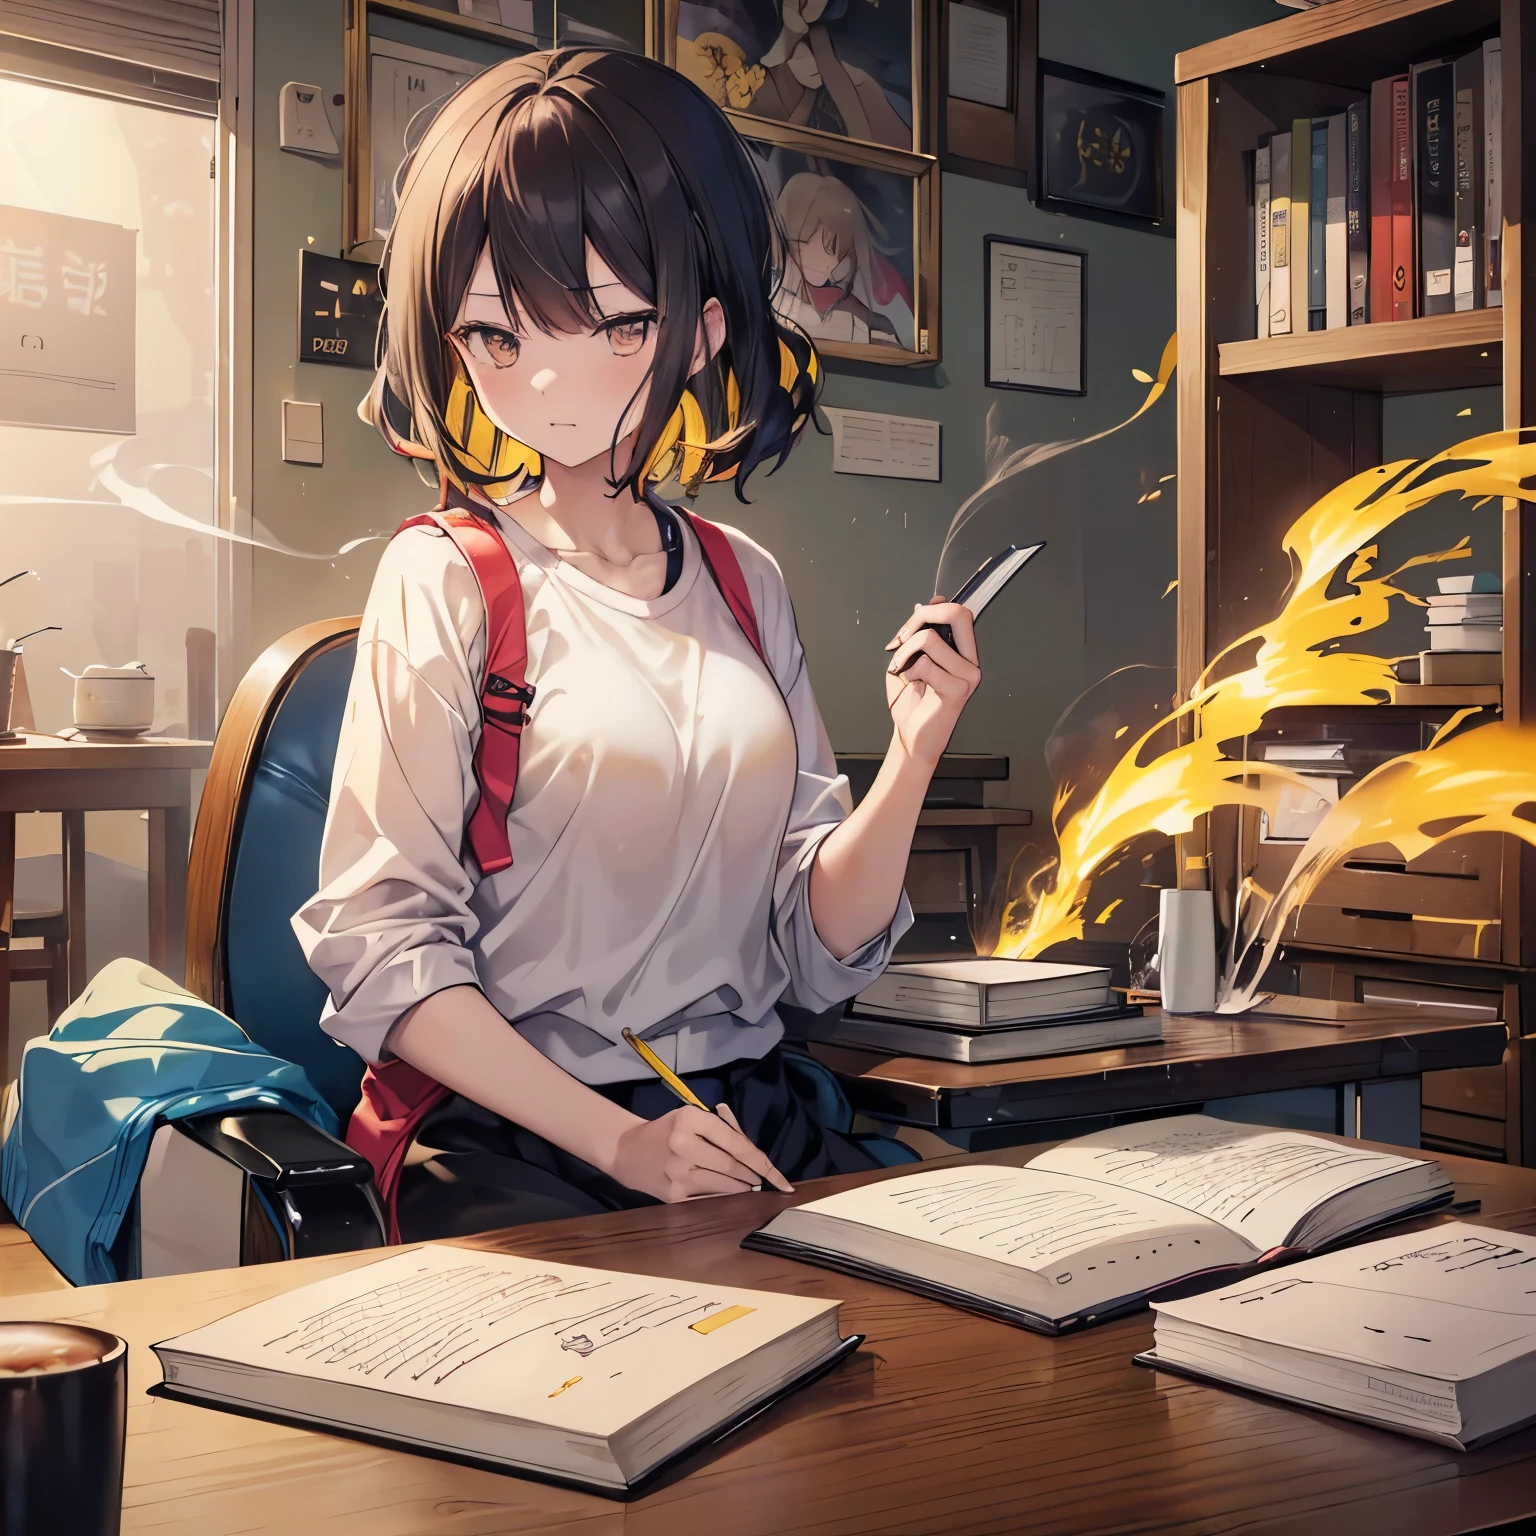 ((kugisaki nobara)),((velocity)),Yellow smoke,Attacked by farts, (((Women sitting in a chair and writing with a book on the table)),velocity,(Yellow smoke is rising),i&#39;i&#39;i&#39;i&#39;i&#39;i&#39;classroom)),((One Woman)),((A girl smells a fart and smiled faintly)),((fart while writing)),((blushing)),best quality,detailed,masterpiece:1.2、top-quality)、(the Extremely Detailed CG Unity 8K Wallpapers、ultra-detailliert、Best Shadows)、(Detailed background)、(The best lighting、extremely delicate and beautiful)、depth of fields、1girl in、solo、looking arround her,Women wear jujutsu ,Ephemeral,,(brownhair),(jujutsu outfit)),((((Girl is embarassed when she smells the bad smell of farts)))),outfit like a jujutsu witch,((((profile facing diagonally)))),((i&#39;I closed my mouth with hand feel embarassed...)),(()),((embarassing look)),((massive fart)),((fart text))